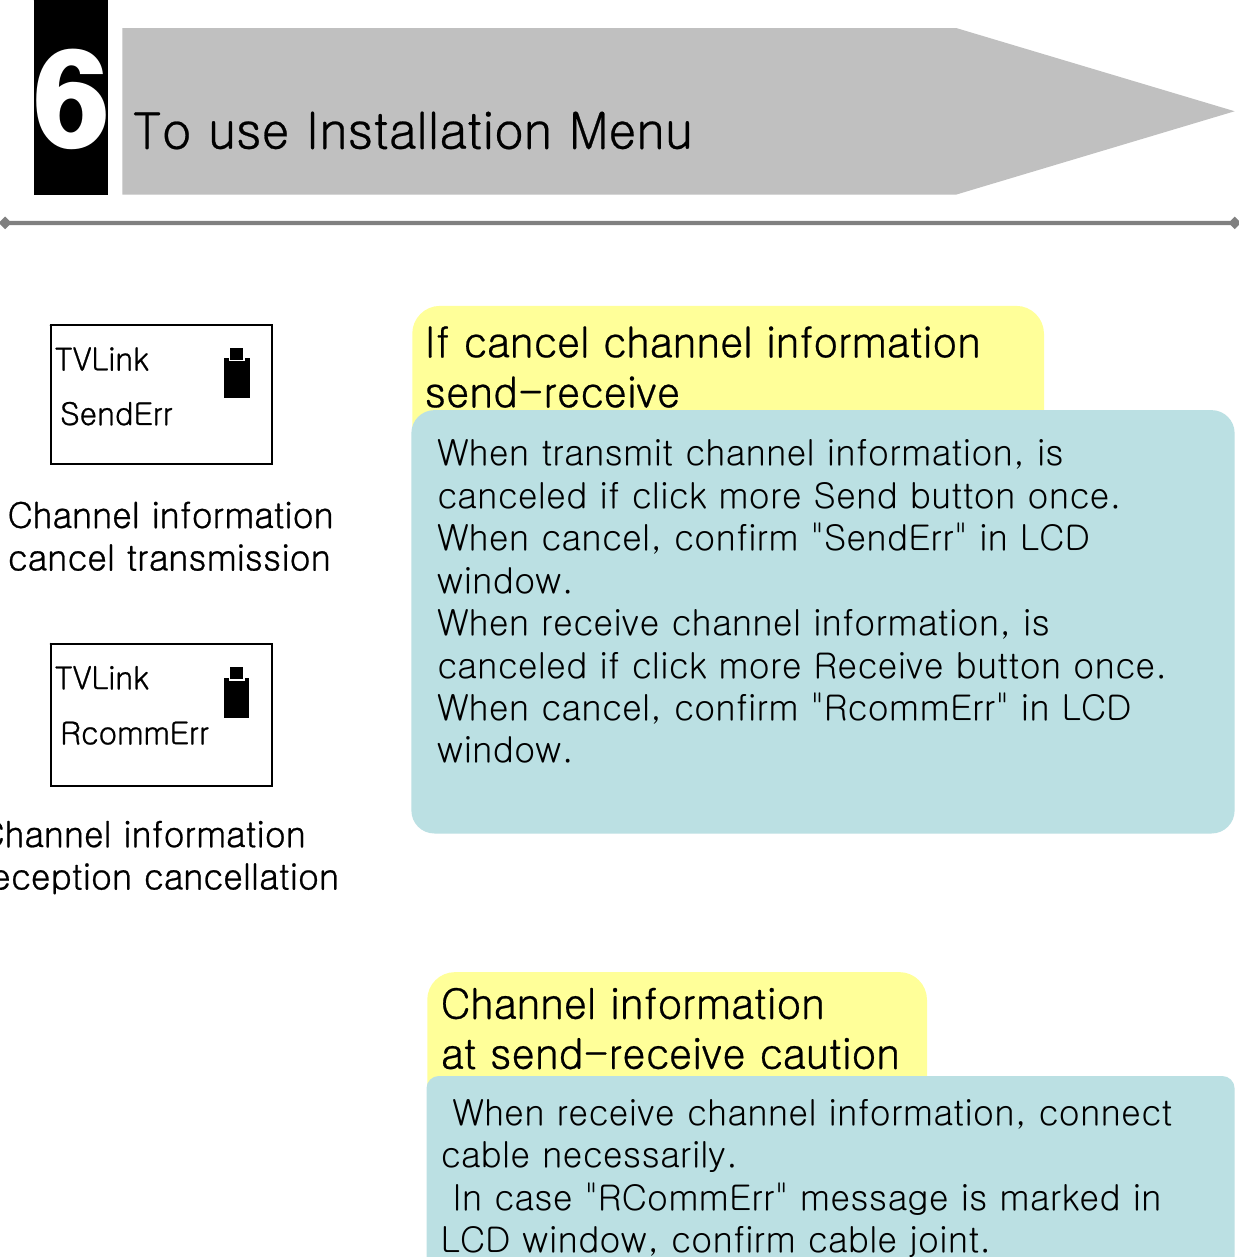 6If cancel channel information send-receiveWhen transmit channel information, is canceled if click more Send button once.When cancel, confirm &quot;SendErr&quot; in LCD window.When receive channel information, is canceled if click more Receive button once.When cancel, confirm &quot;RcommErr&quot; in LCD window.Channel information at send-receive cautionWhen receive channel information, connect cable necessarily.In case &quot;RCommErr&quot; message is marked in LCD window, confirm cable joint.TVLinkSendErrTVLinkRcommErrChannel information cancel transmissionChannel information eception cancellationTo use Installation Menu